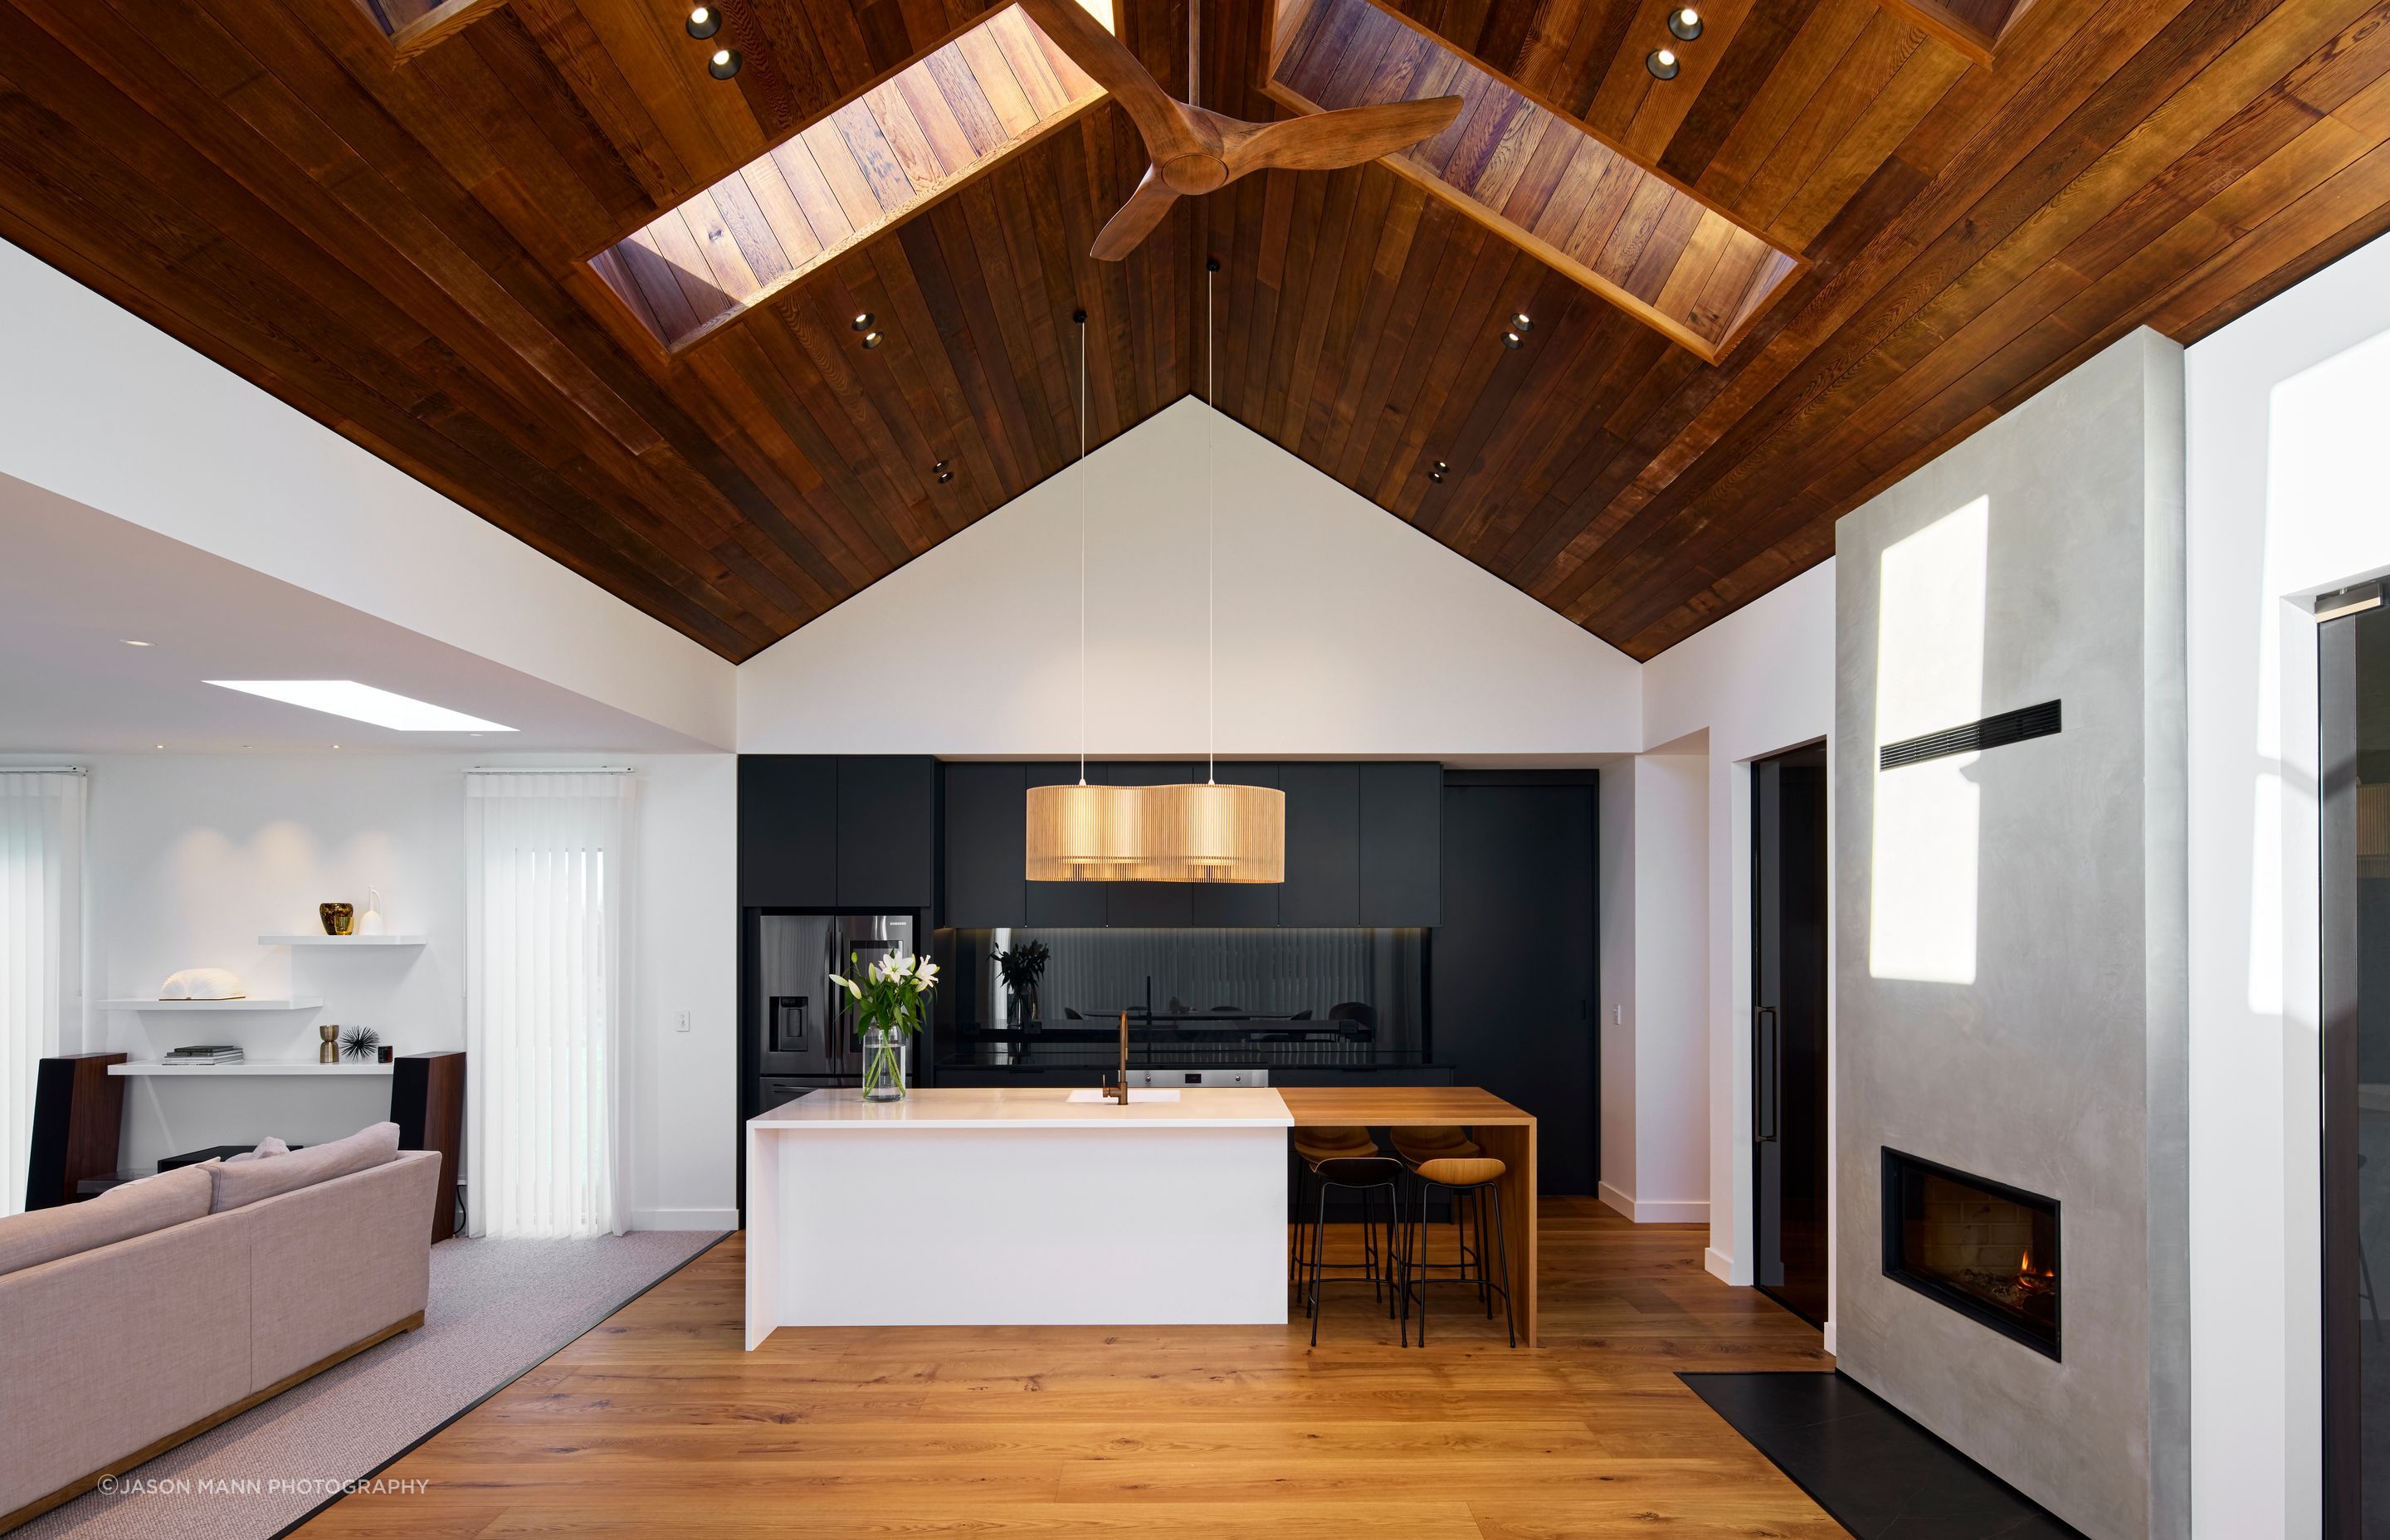 Cedar lines the ceiling, with hardwood American oak flooring a contrast to the sleek, dark kitchen cabinetry.